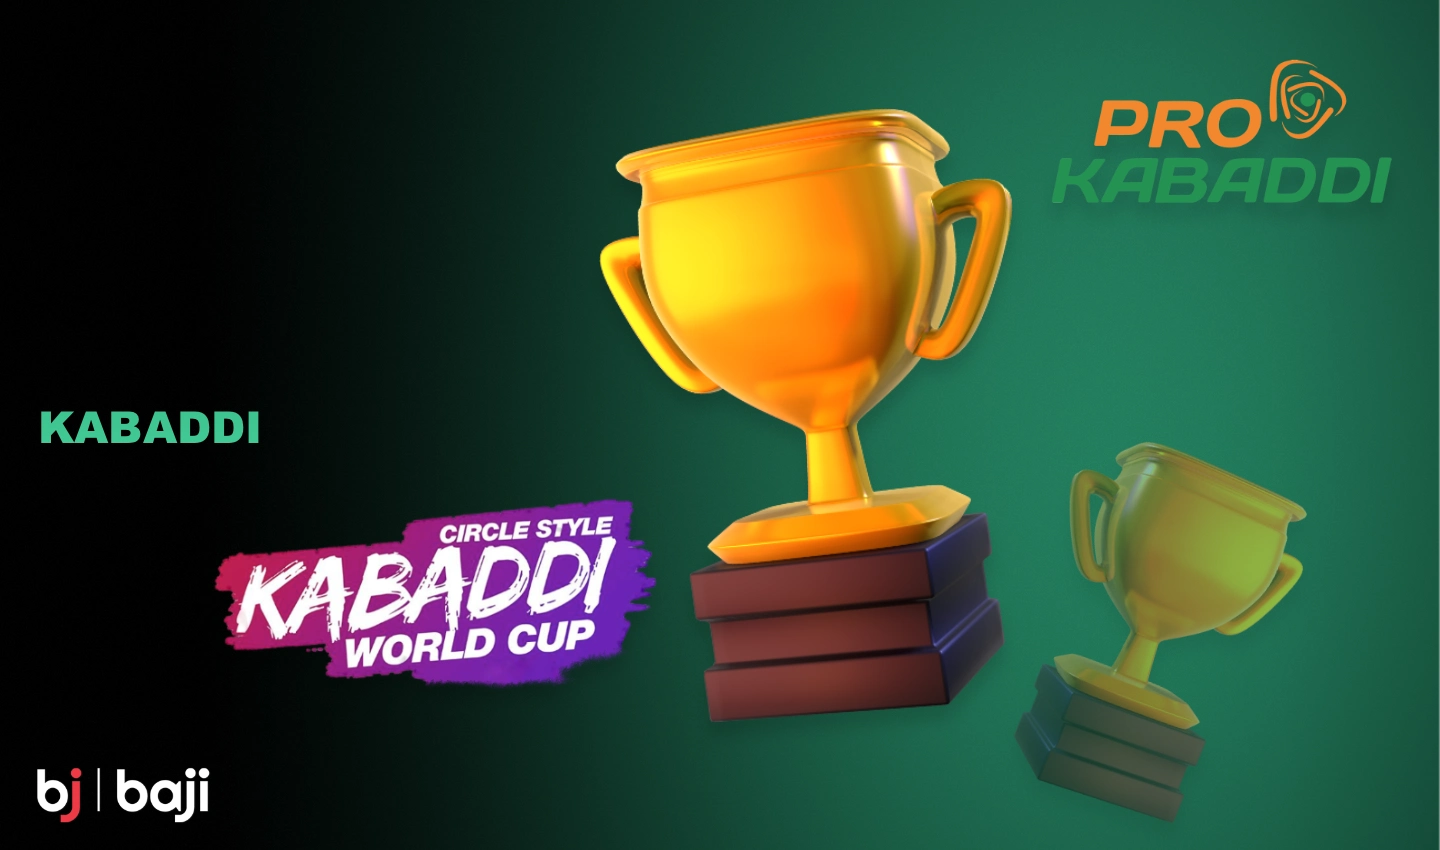 Kabaddi betting is available at Baji for all fans of this exciting game